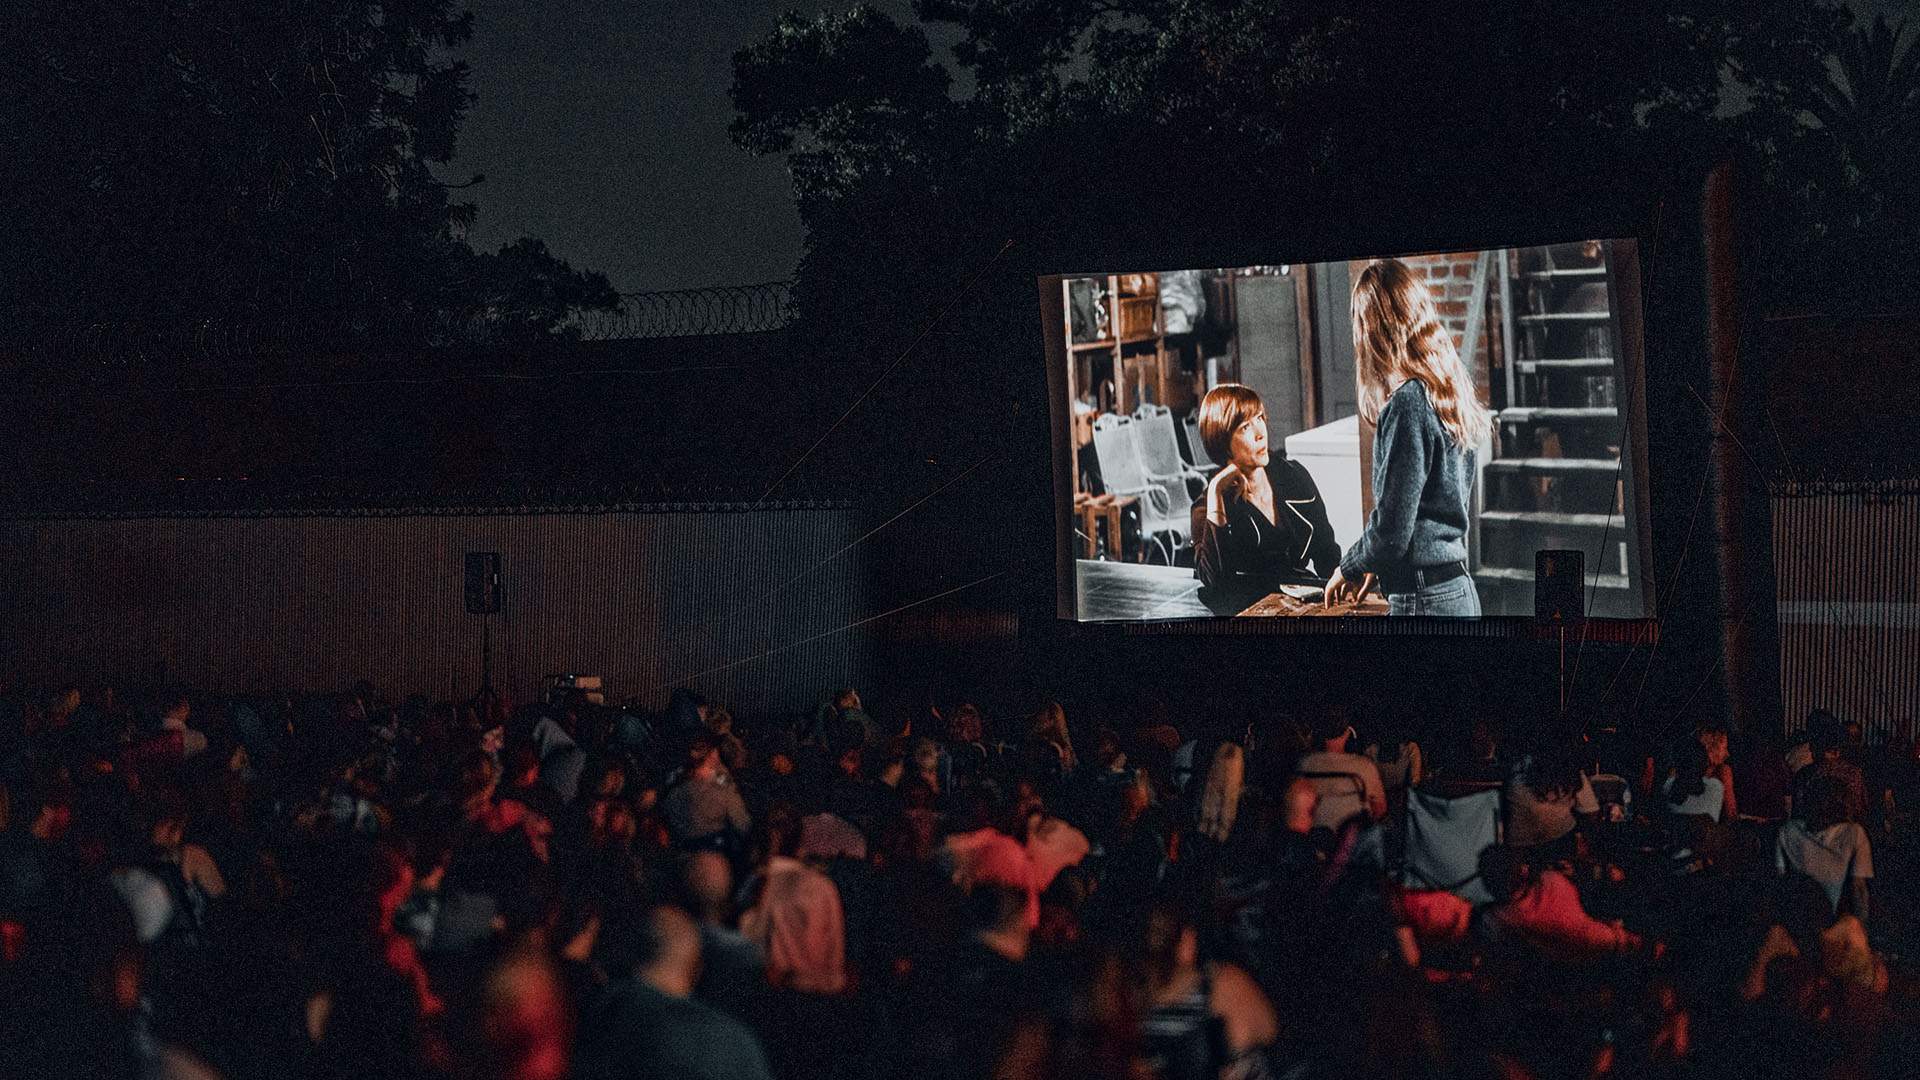 Sydney's Spooky Movie Screenings at Parramatta Gaol and Camperdown Cemetery Will Return From November